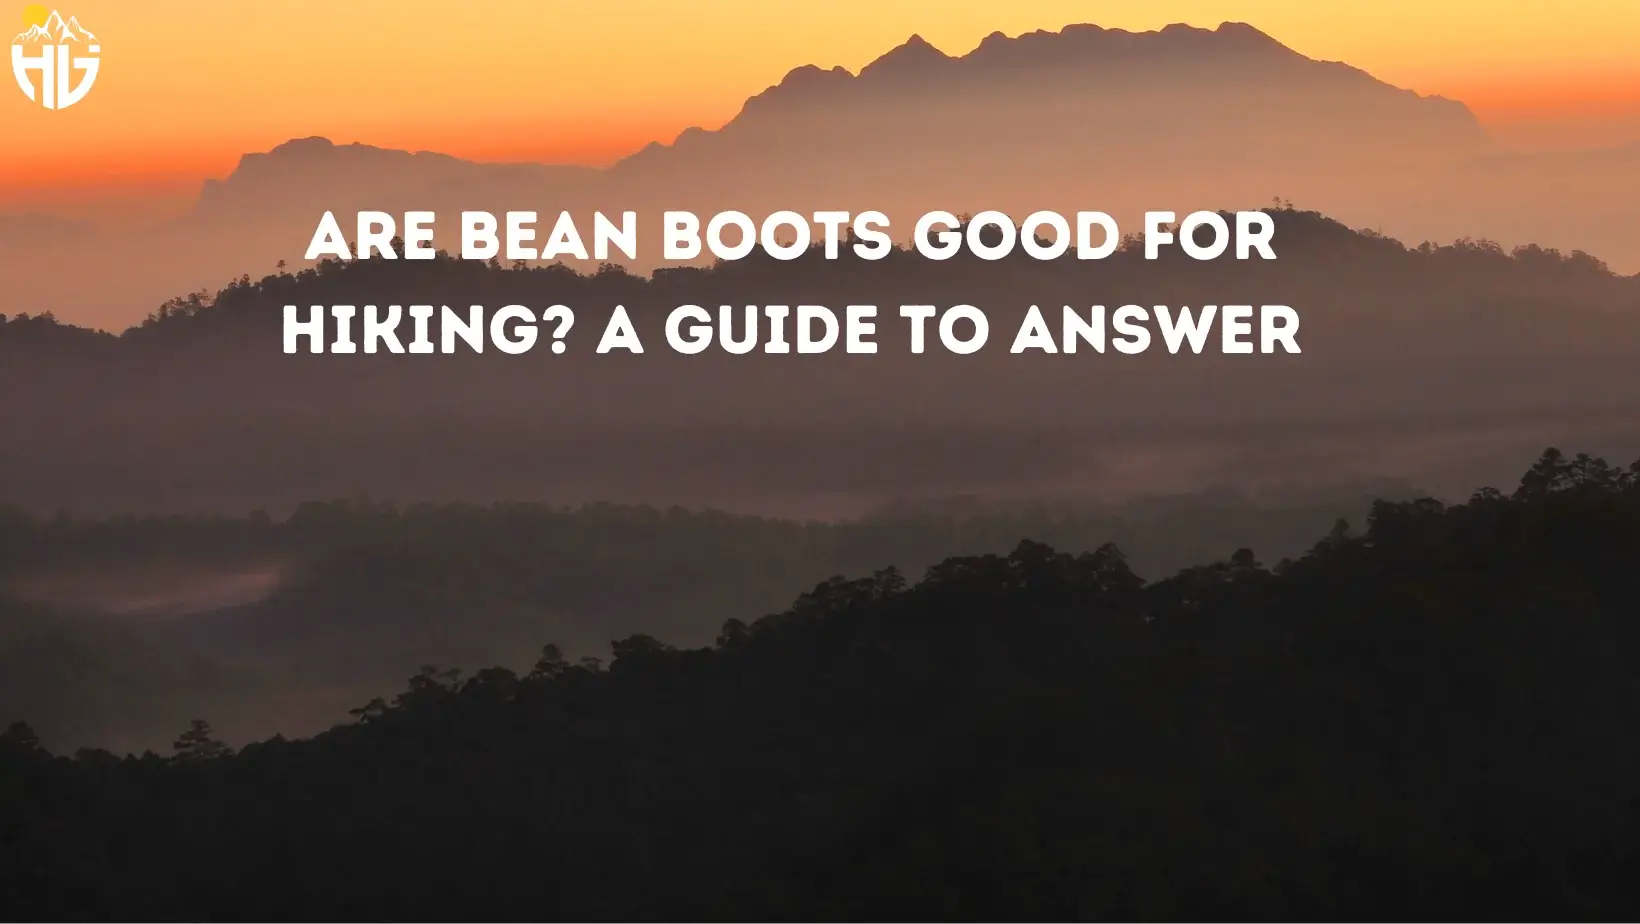 Are Bean Boots Good for Hiking? A Guide To Answer